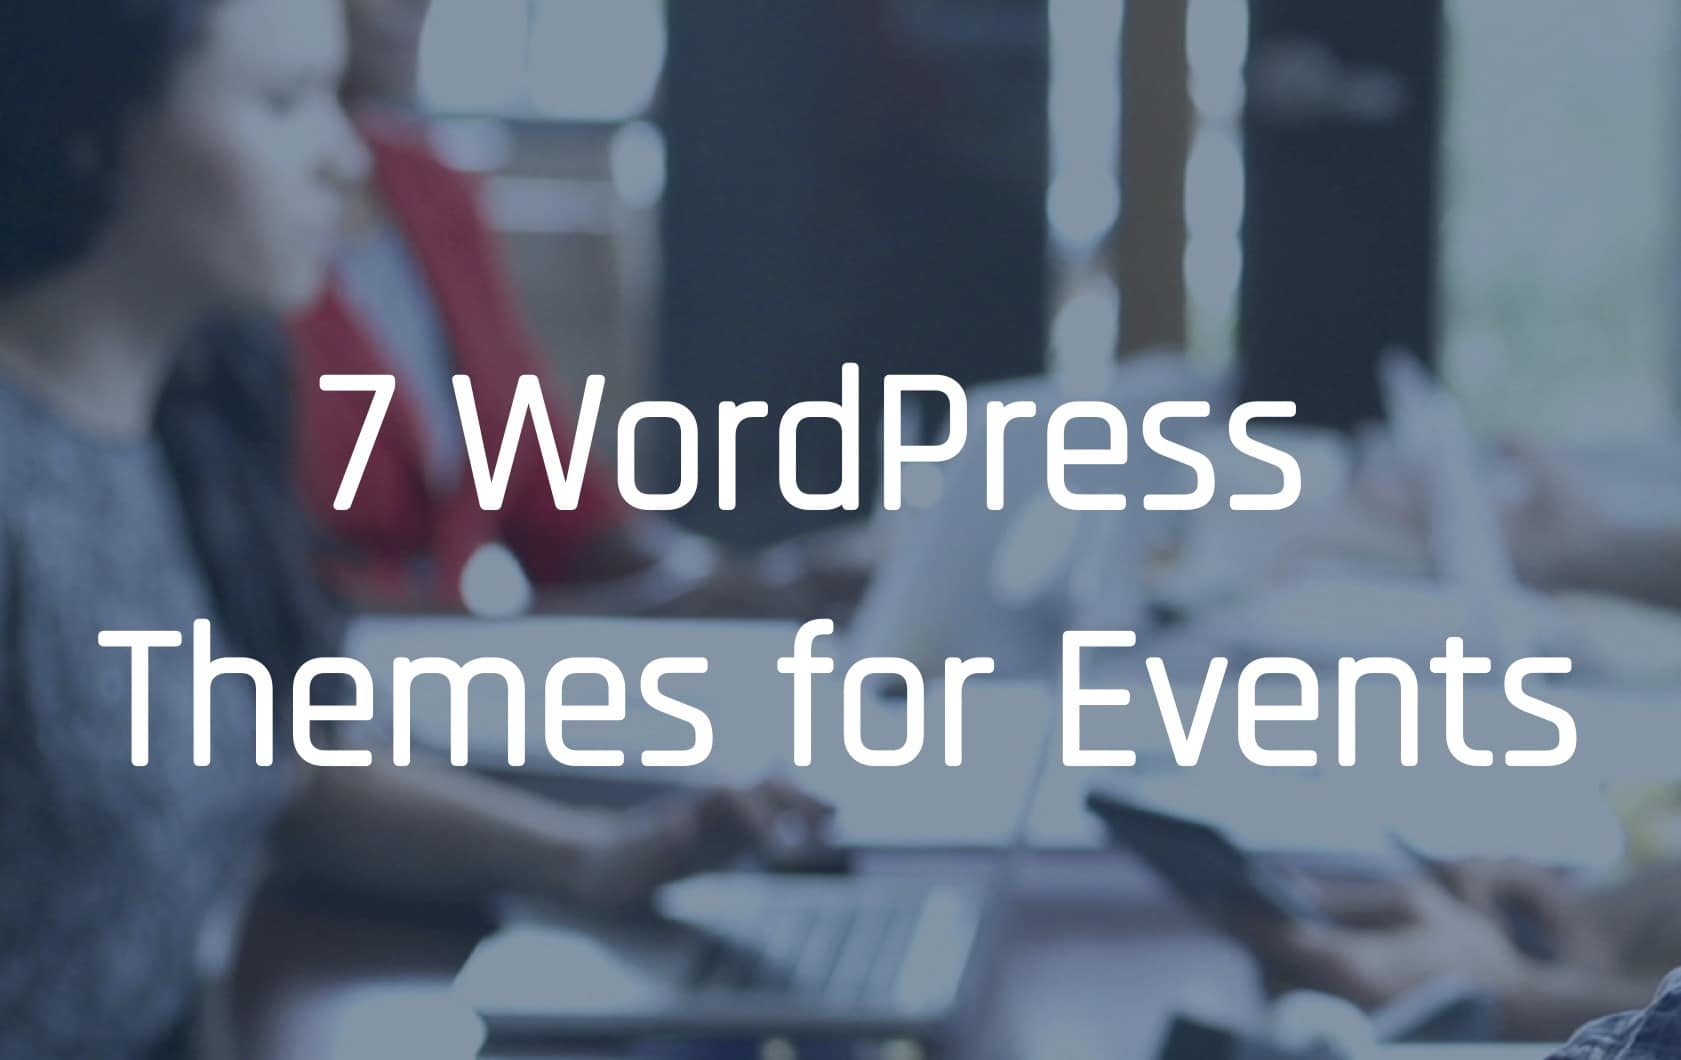 7 WordPress Themes for Events